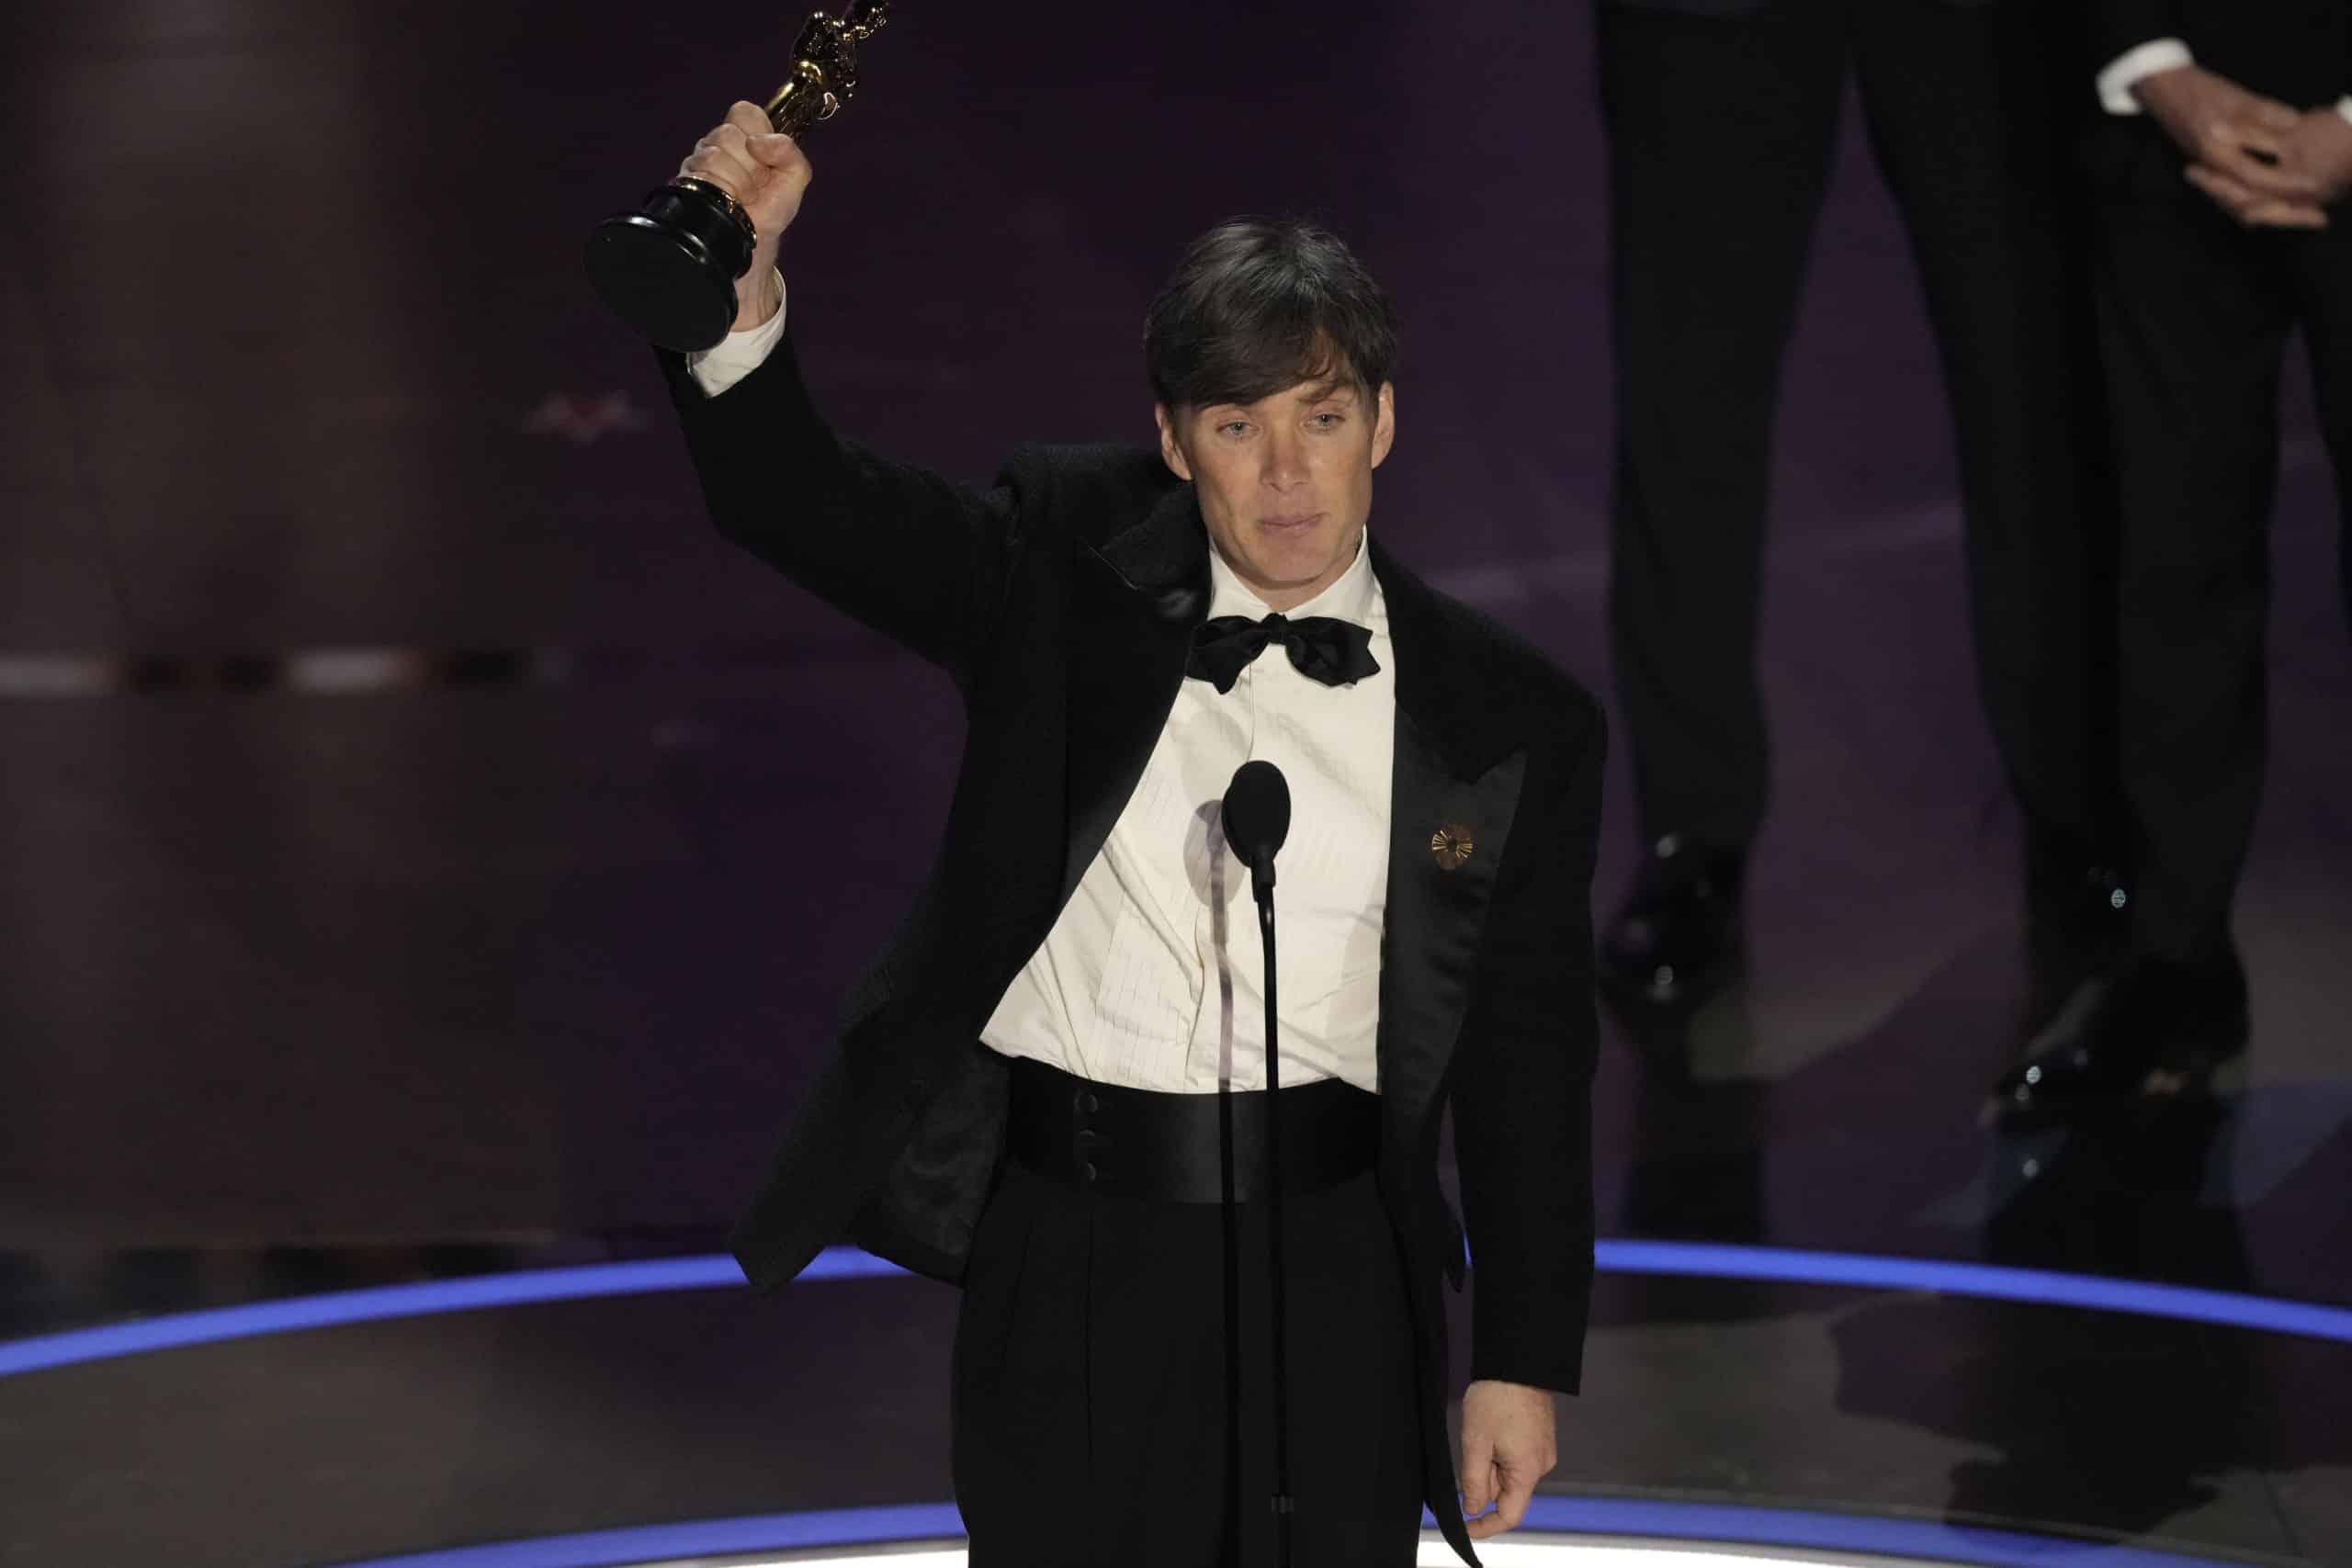 Cillian Murphy wins his first best actor Oscar for role in ‘Oppenheimer